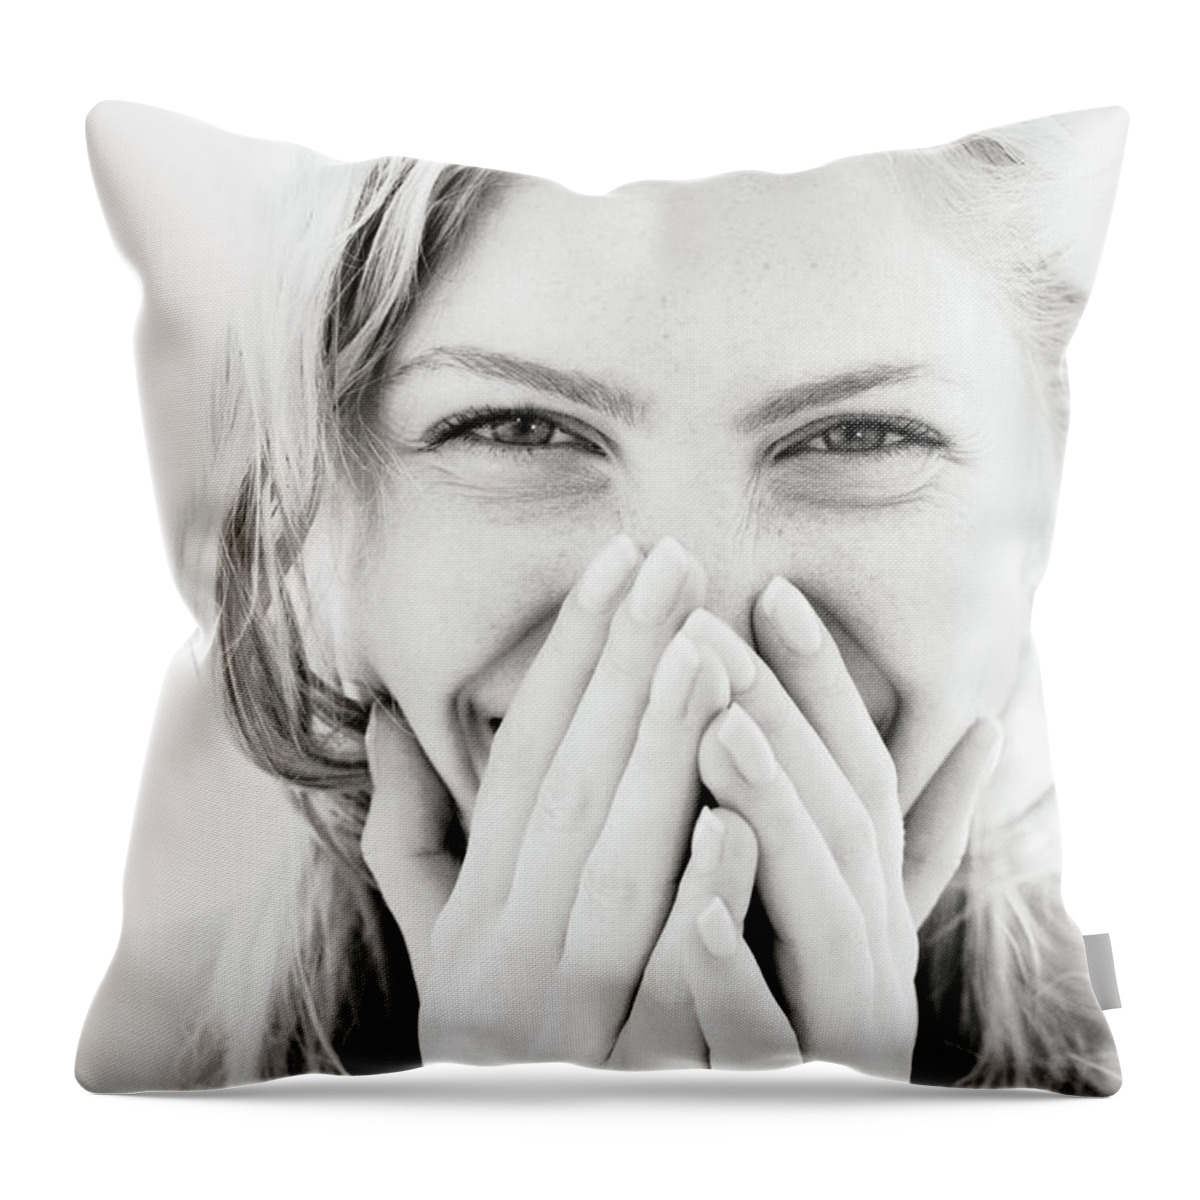 White Background Throw Pillow featuring the photograph Young Woman Laughing, Hands Over Mouth by Pando Hall